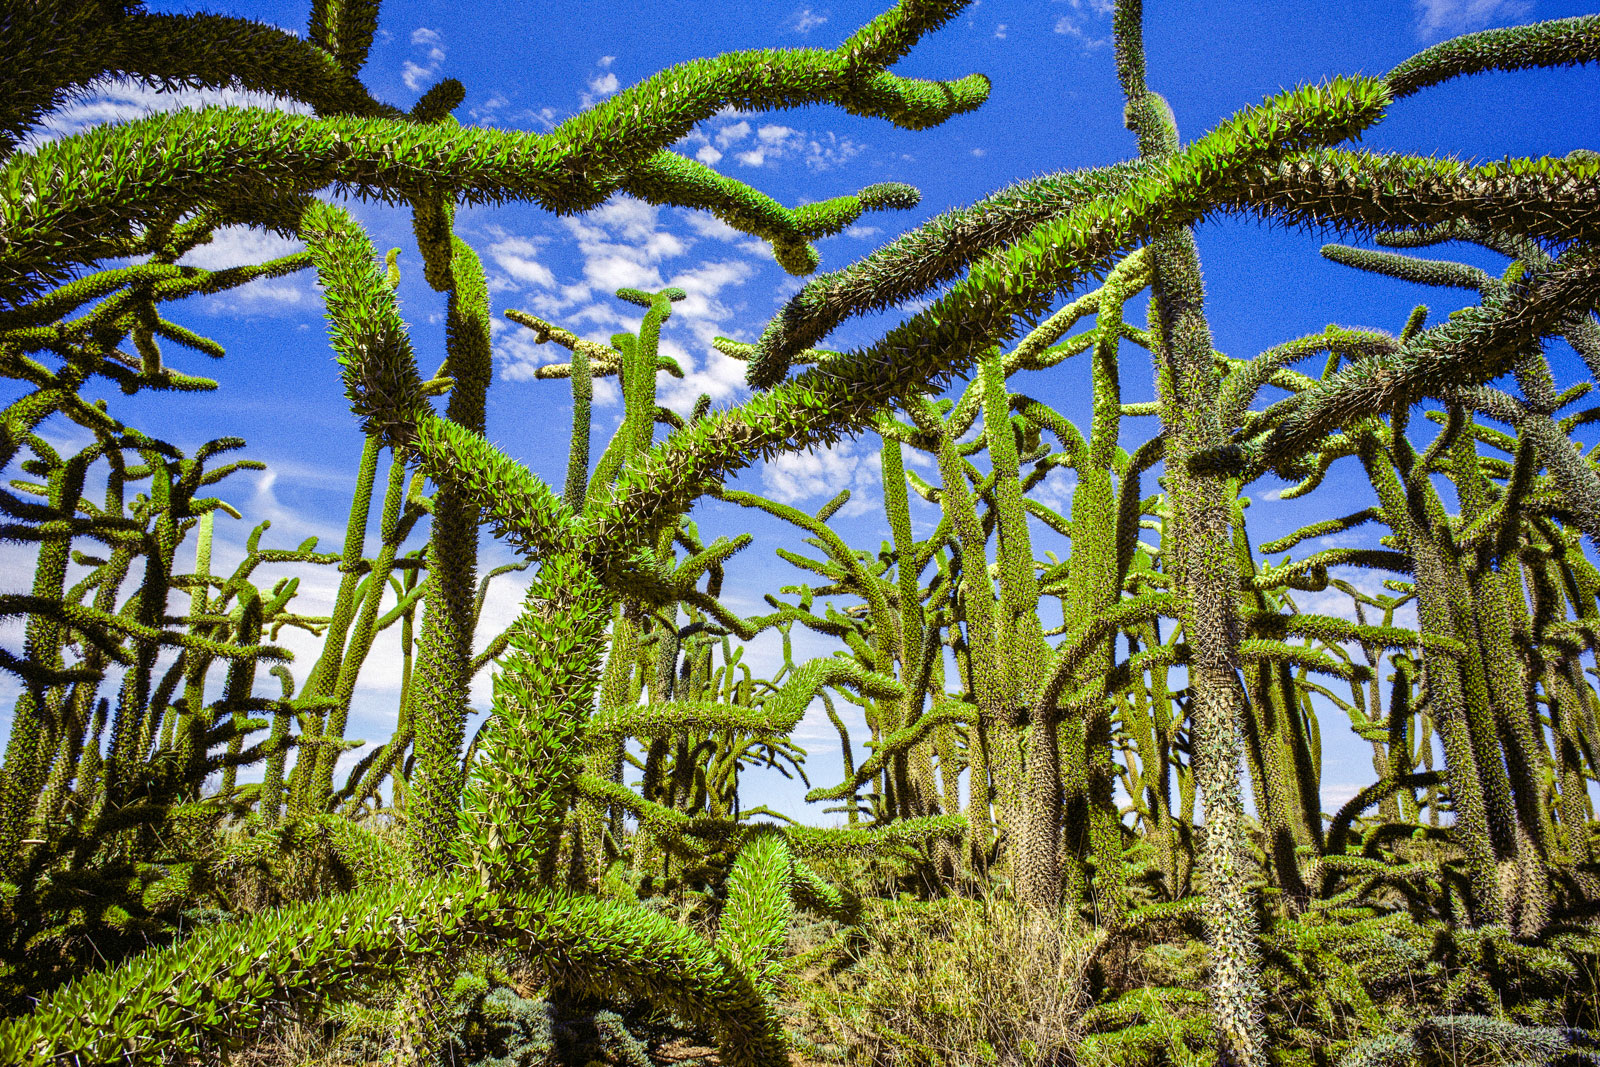 Octopus trees in spiny desert, Southern Madagascar